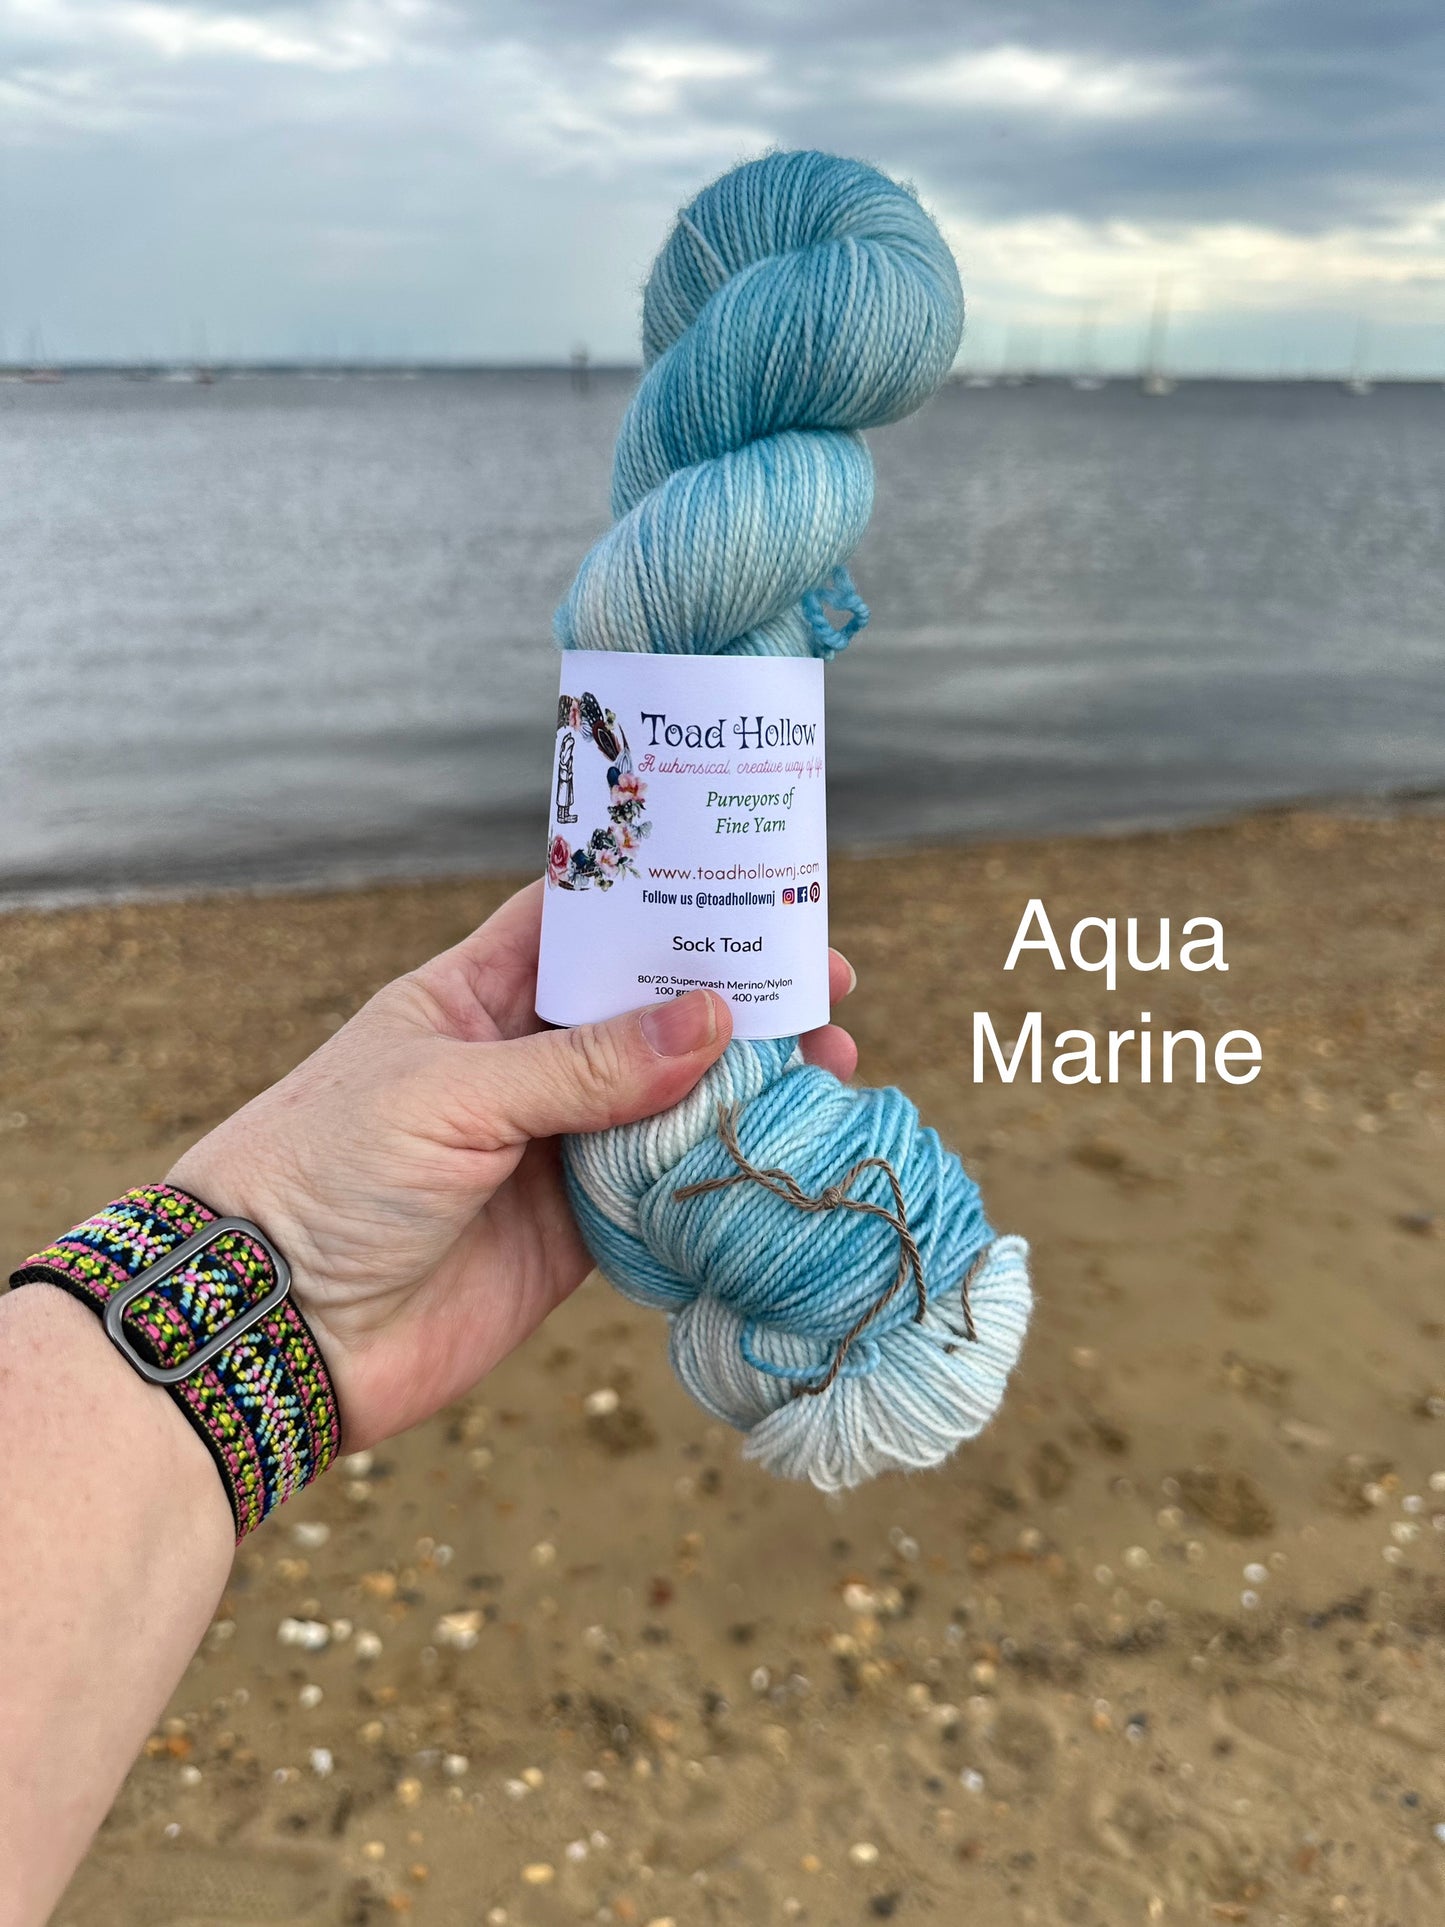 AQUA MARINE from our Beachcomber Collection, Hand Dyed Superwash Merino Yarn,Toad Hollow Yarns